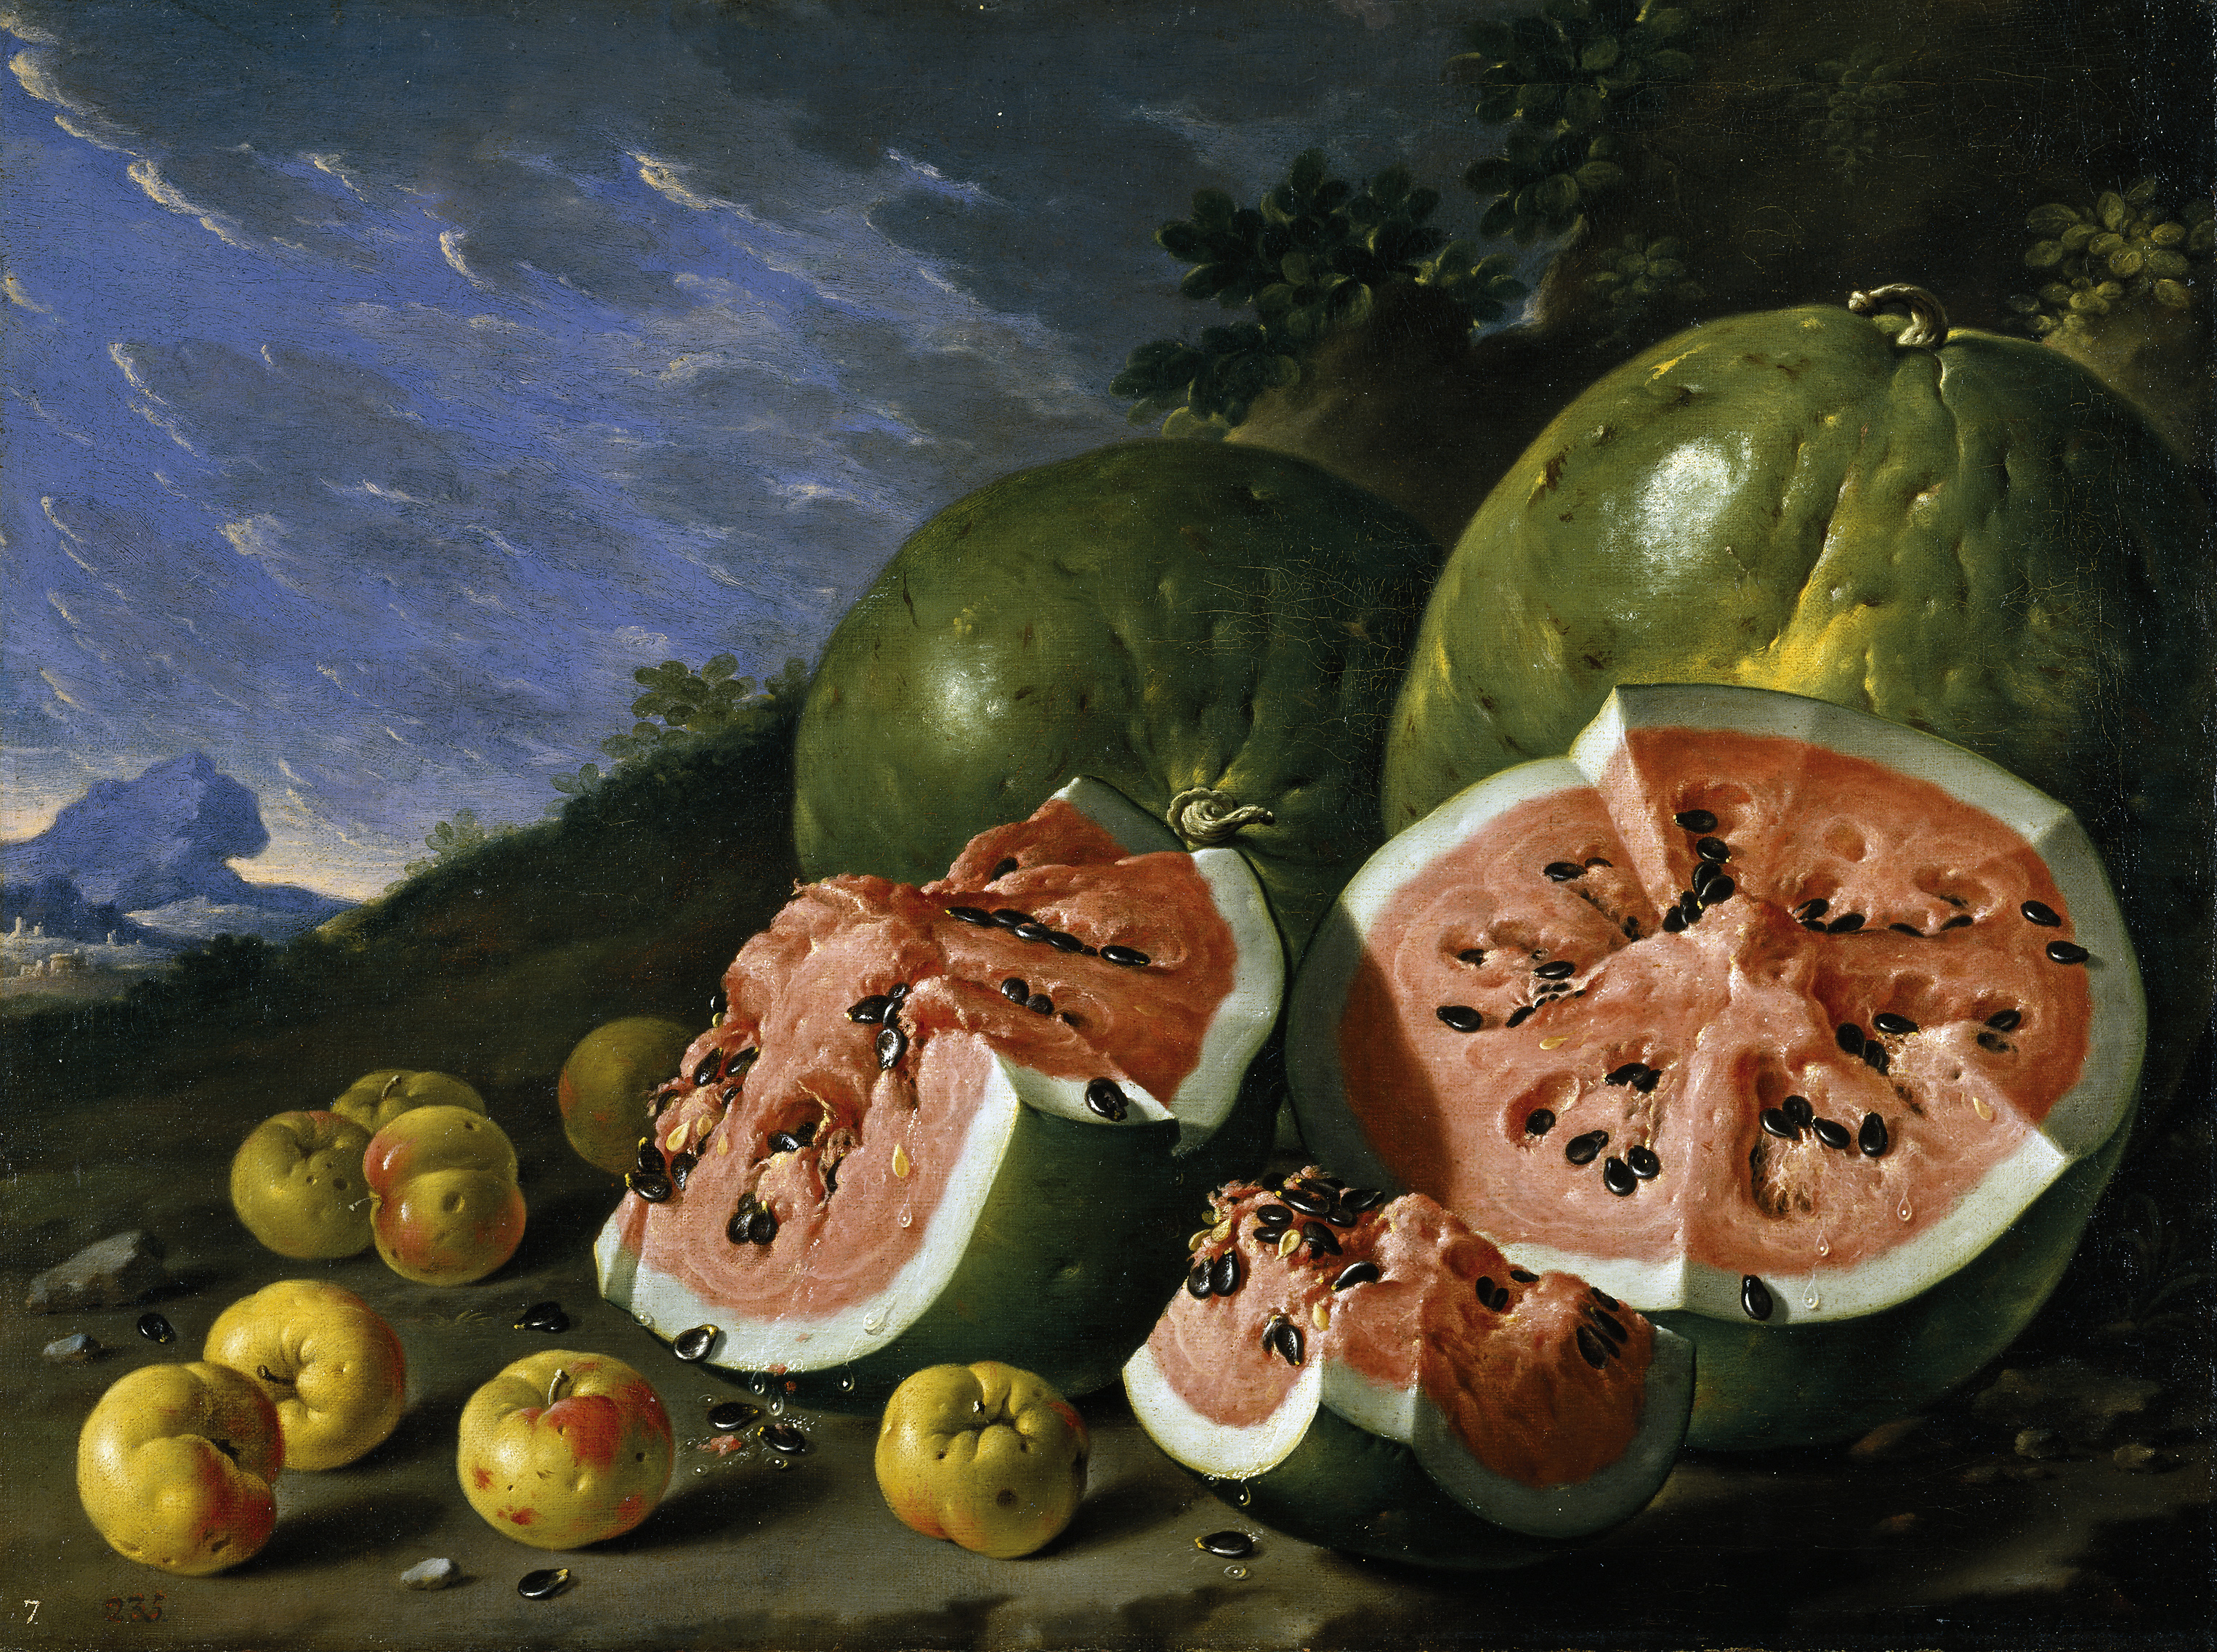 http://upload.wikimedia.org/wikipedia/commons/a/ae/Luis_Melendez,_Still_Life_with_Watermelons_and_Apples,_Museo_del_Prado,_Madird.jpg